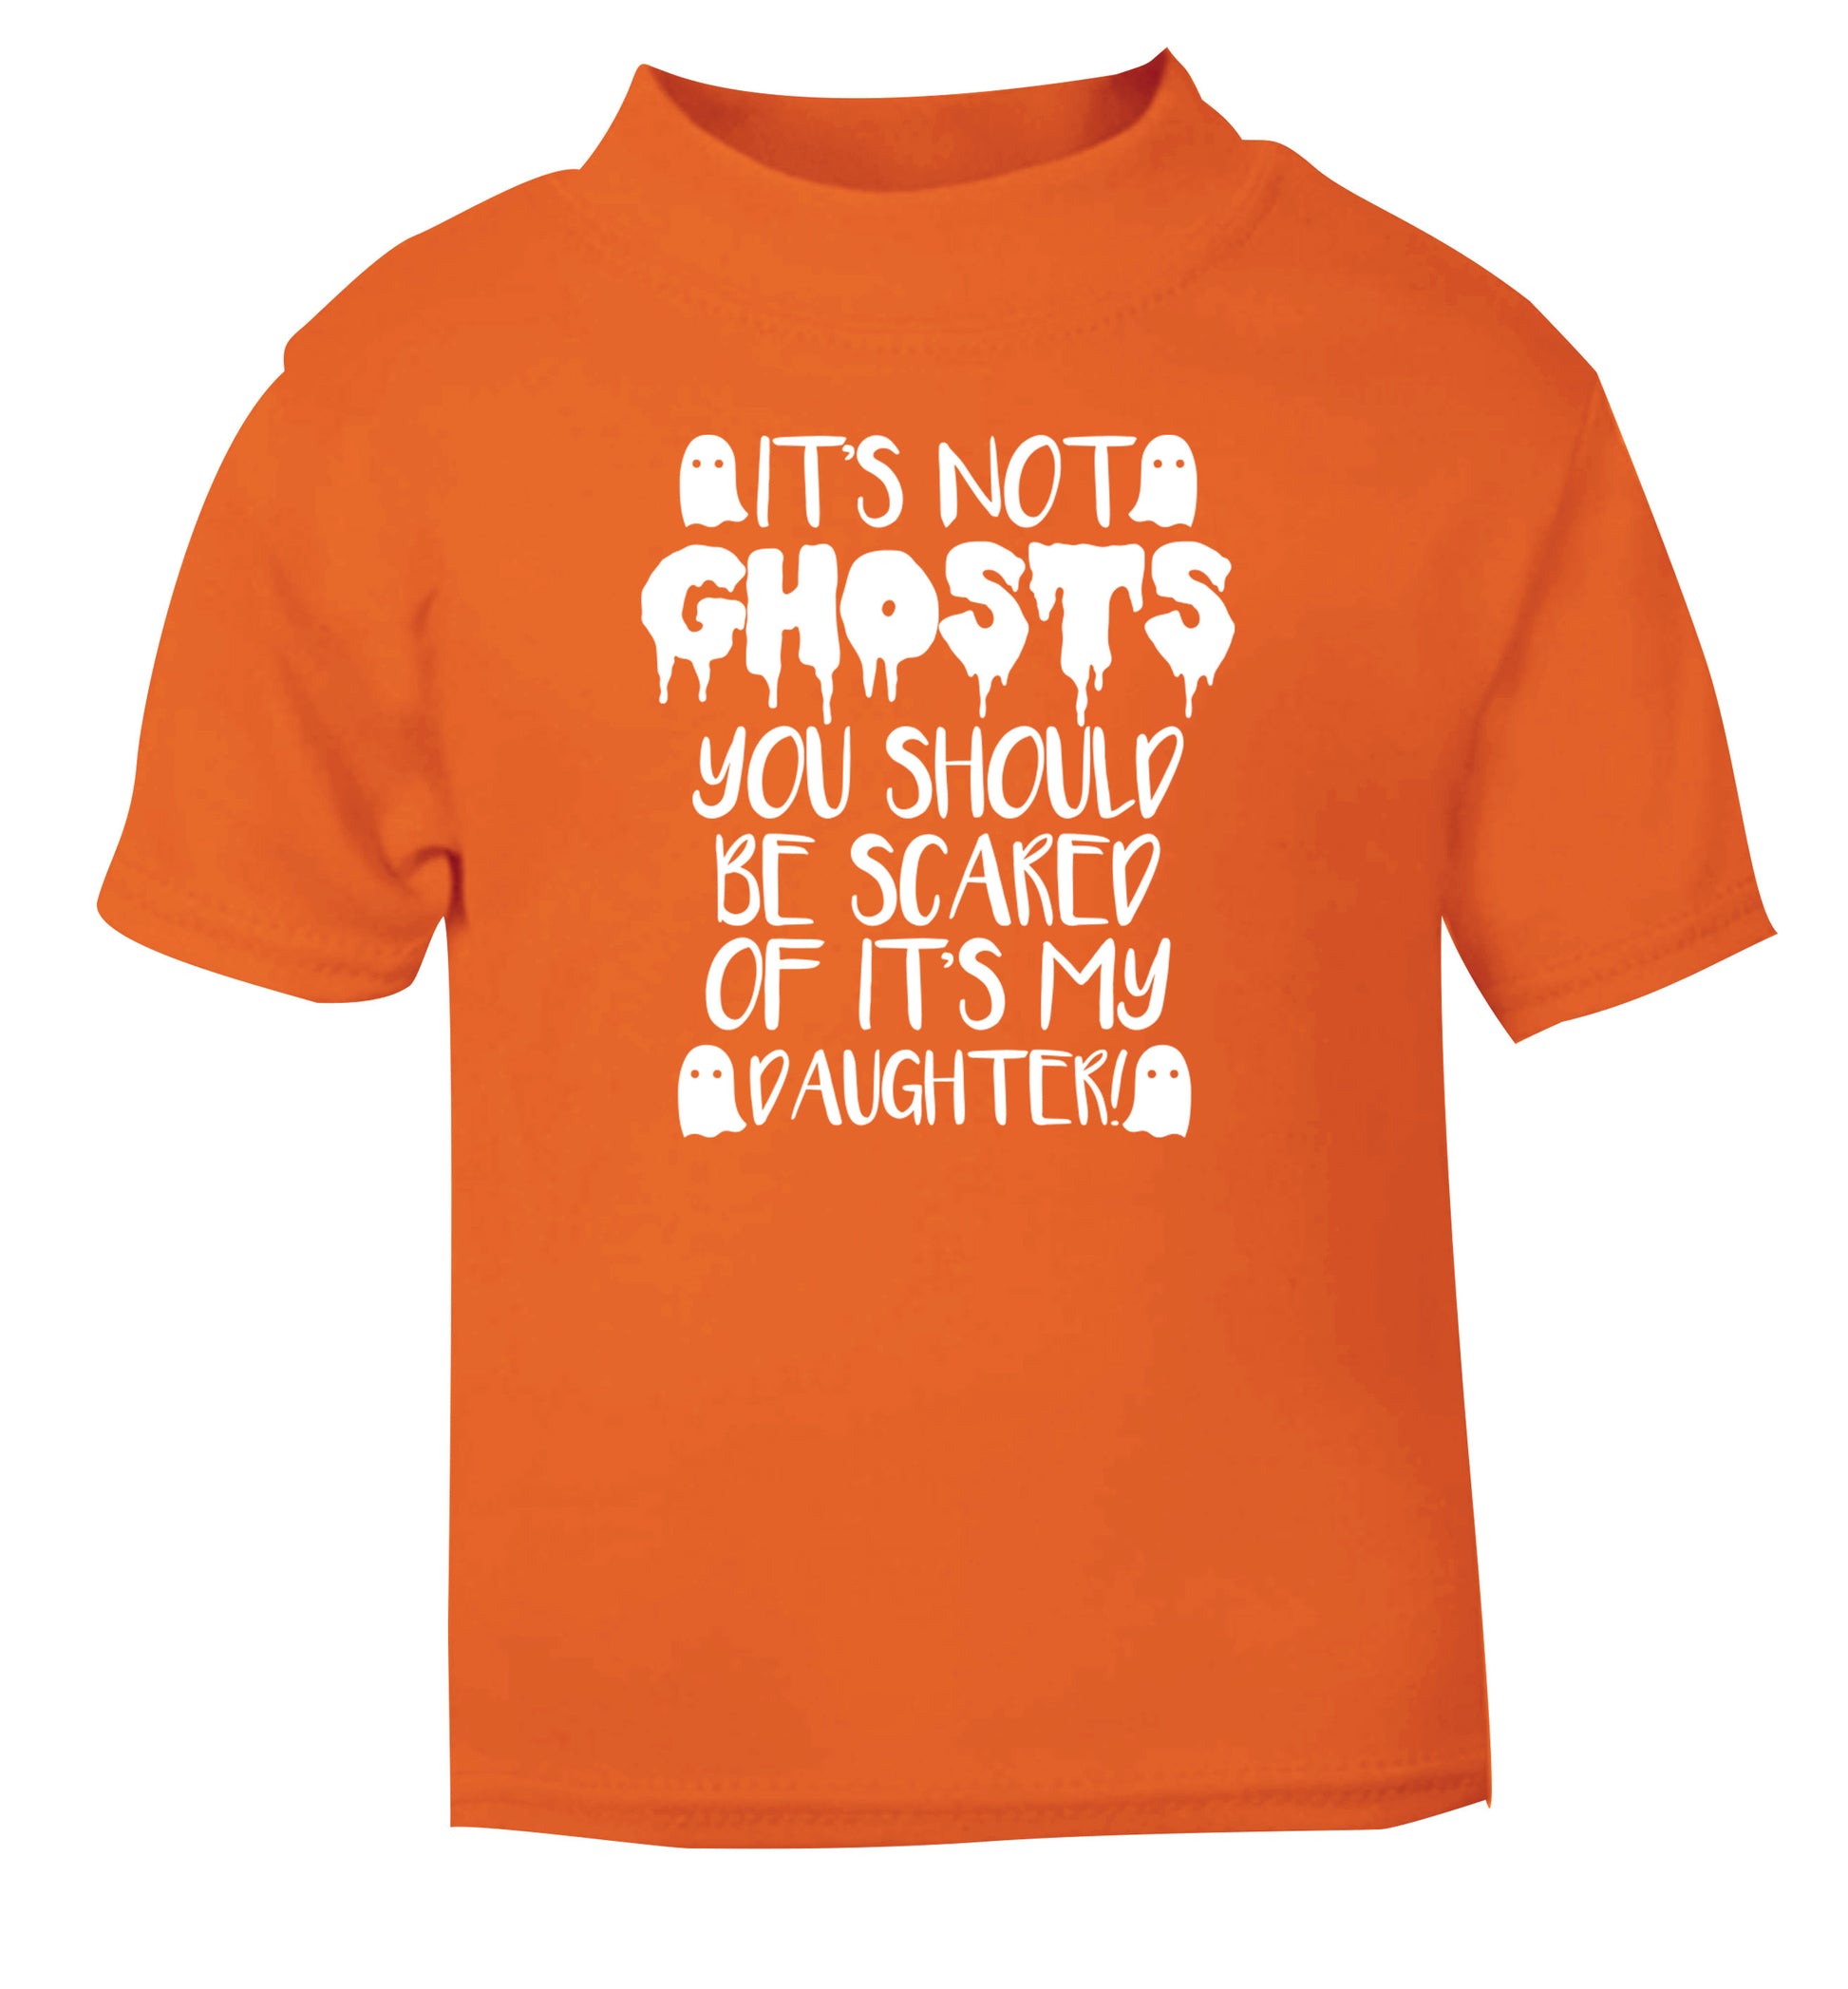 It's not ghosts you should be scared of it's my daughter! orange Baby Toddler Tshirt 2 Years